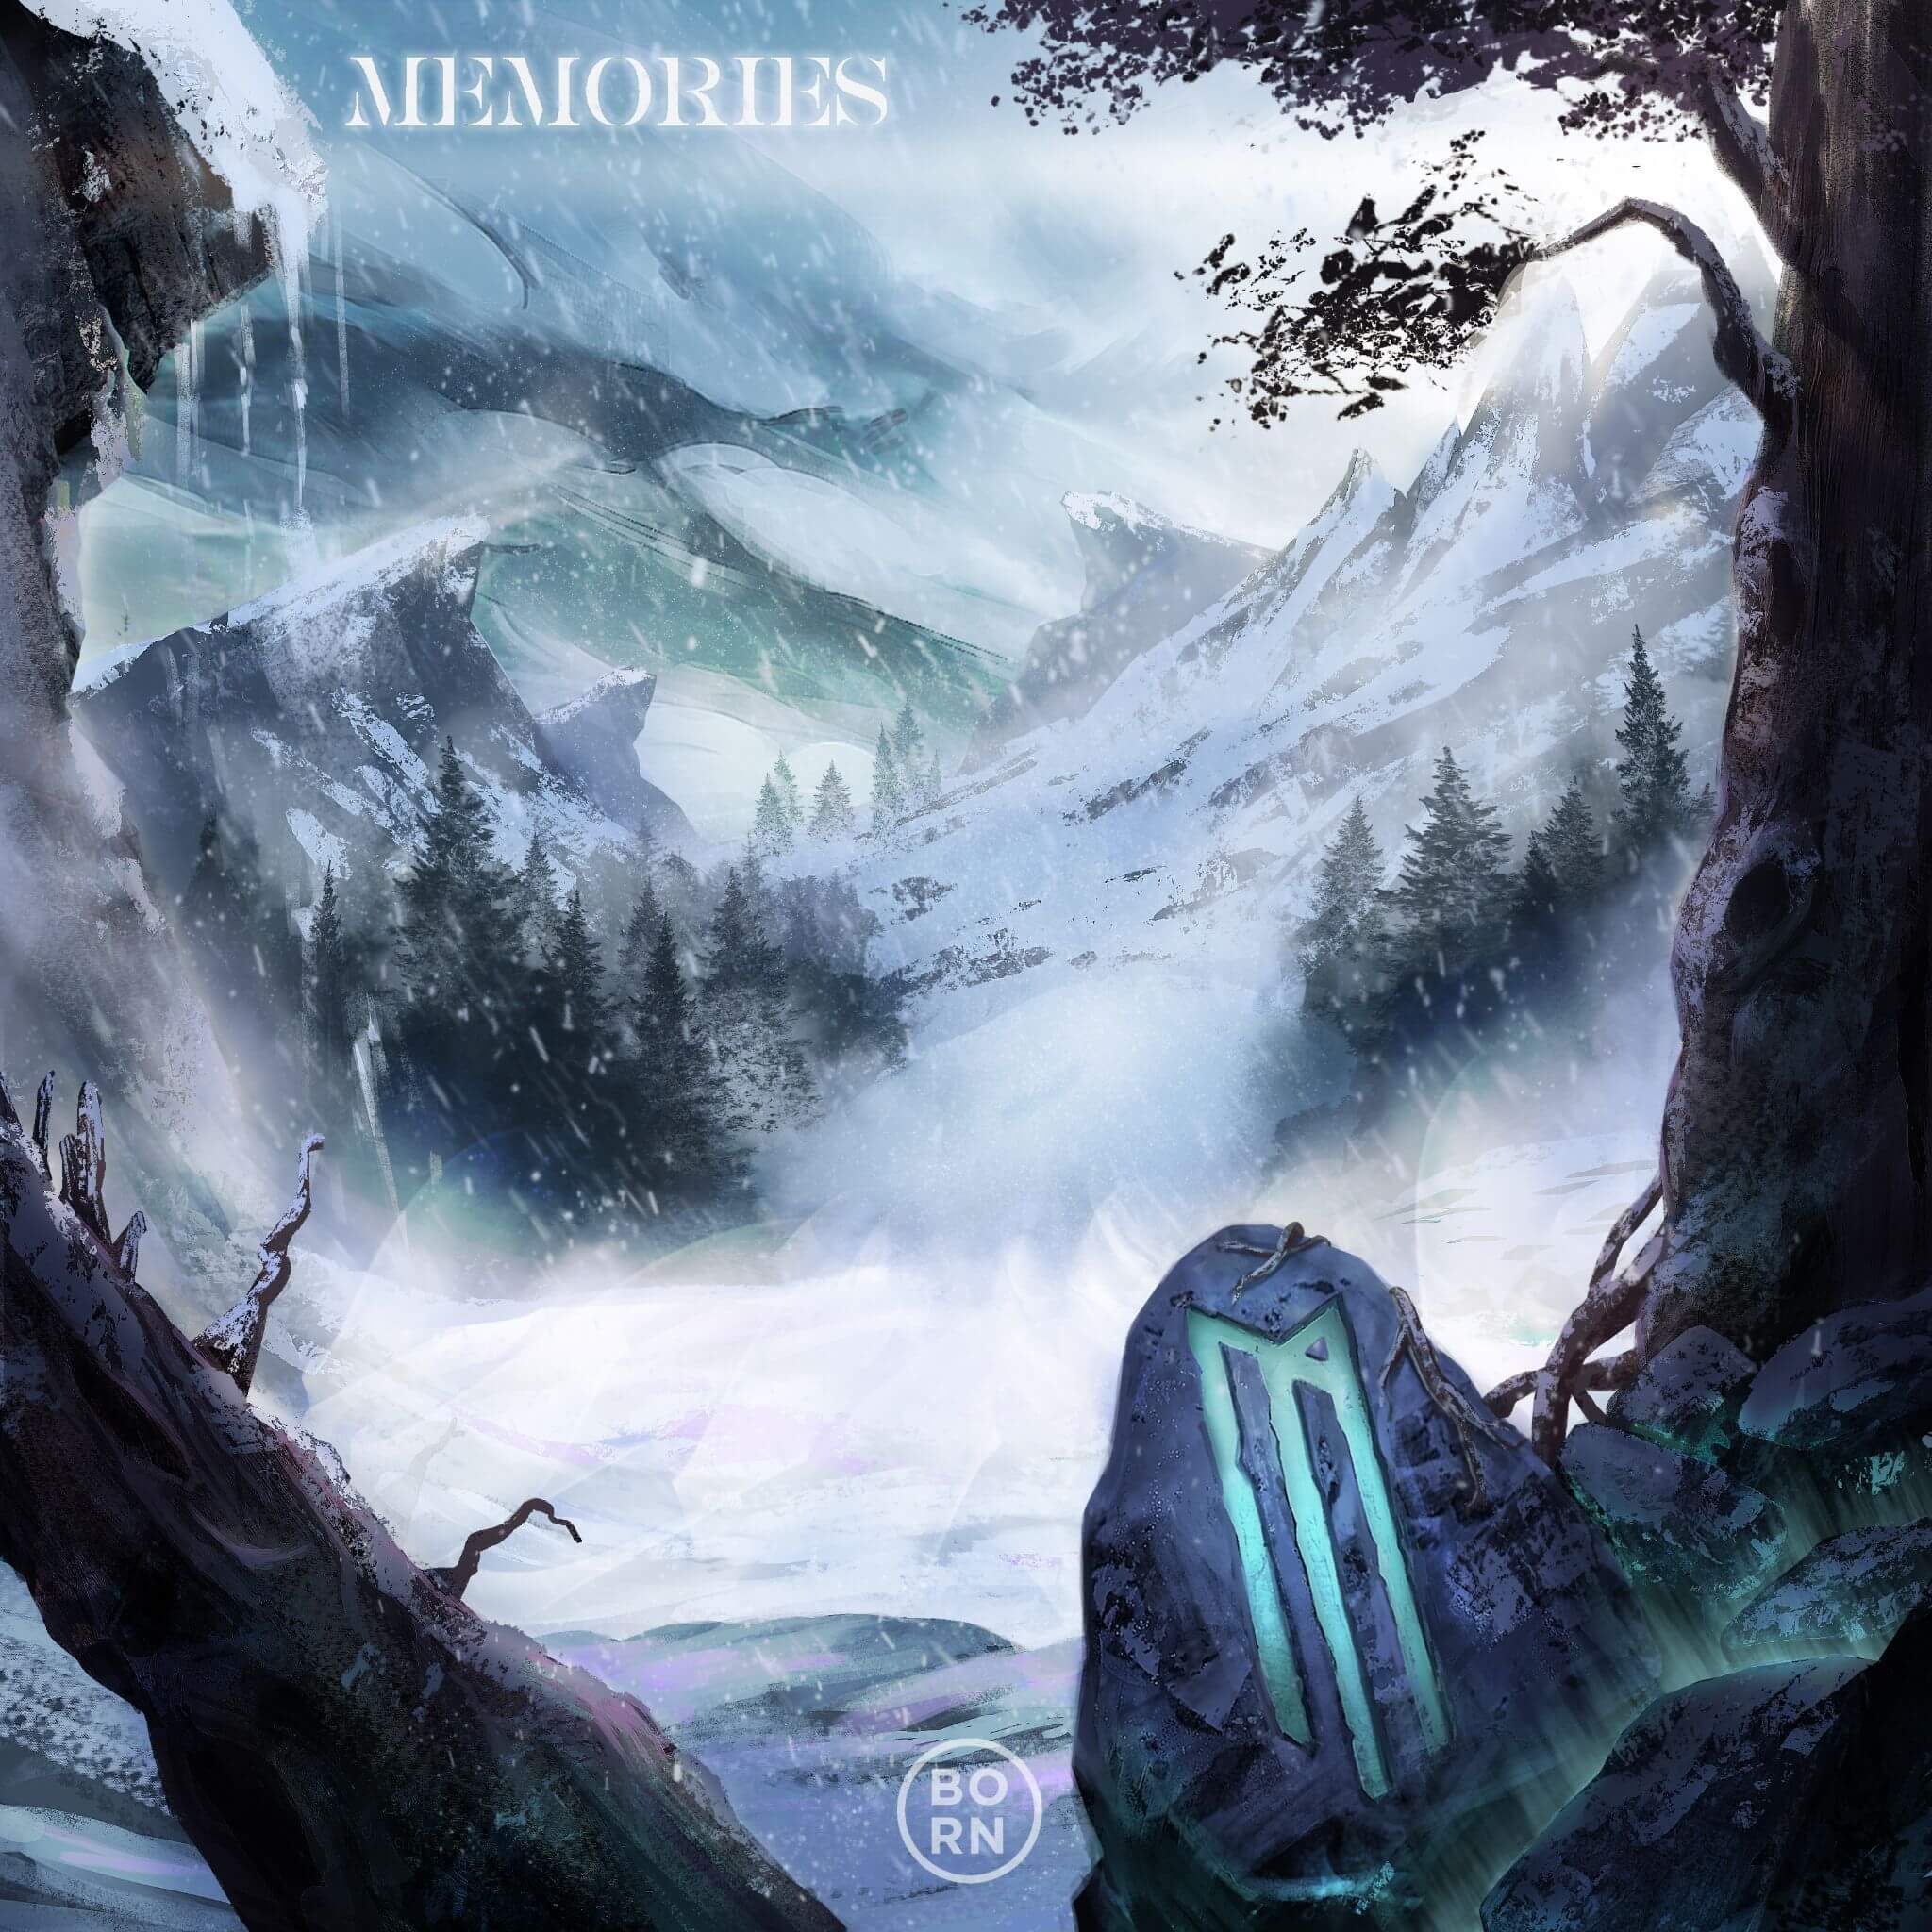 MitiS Takes Us Back in Time With New EP ‘Memories’